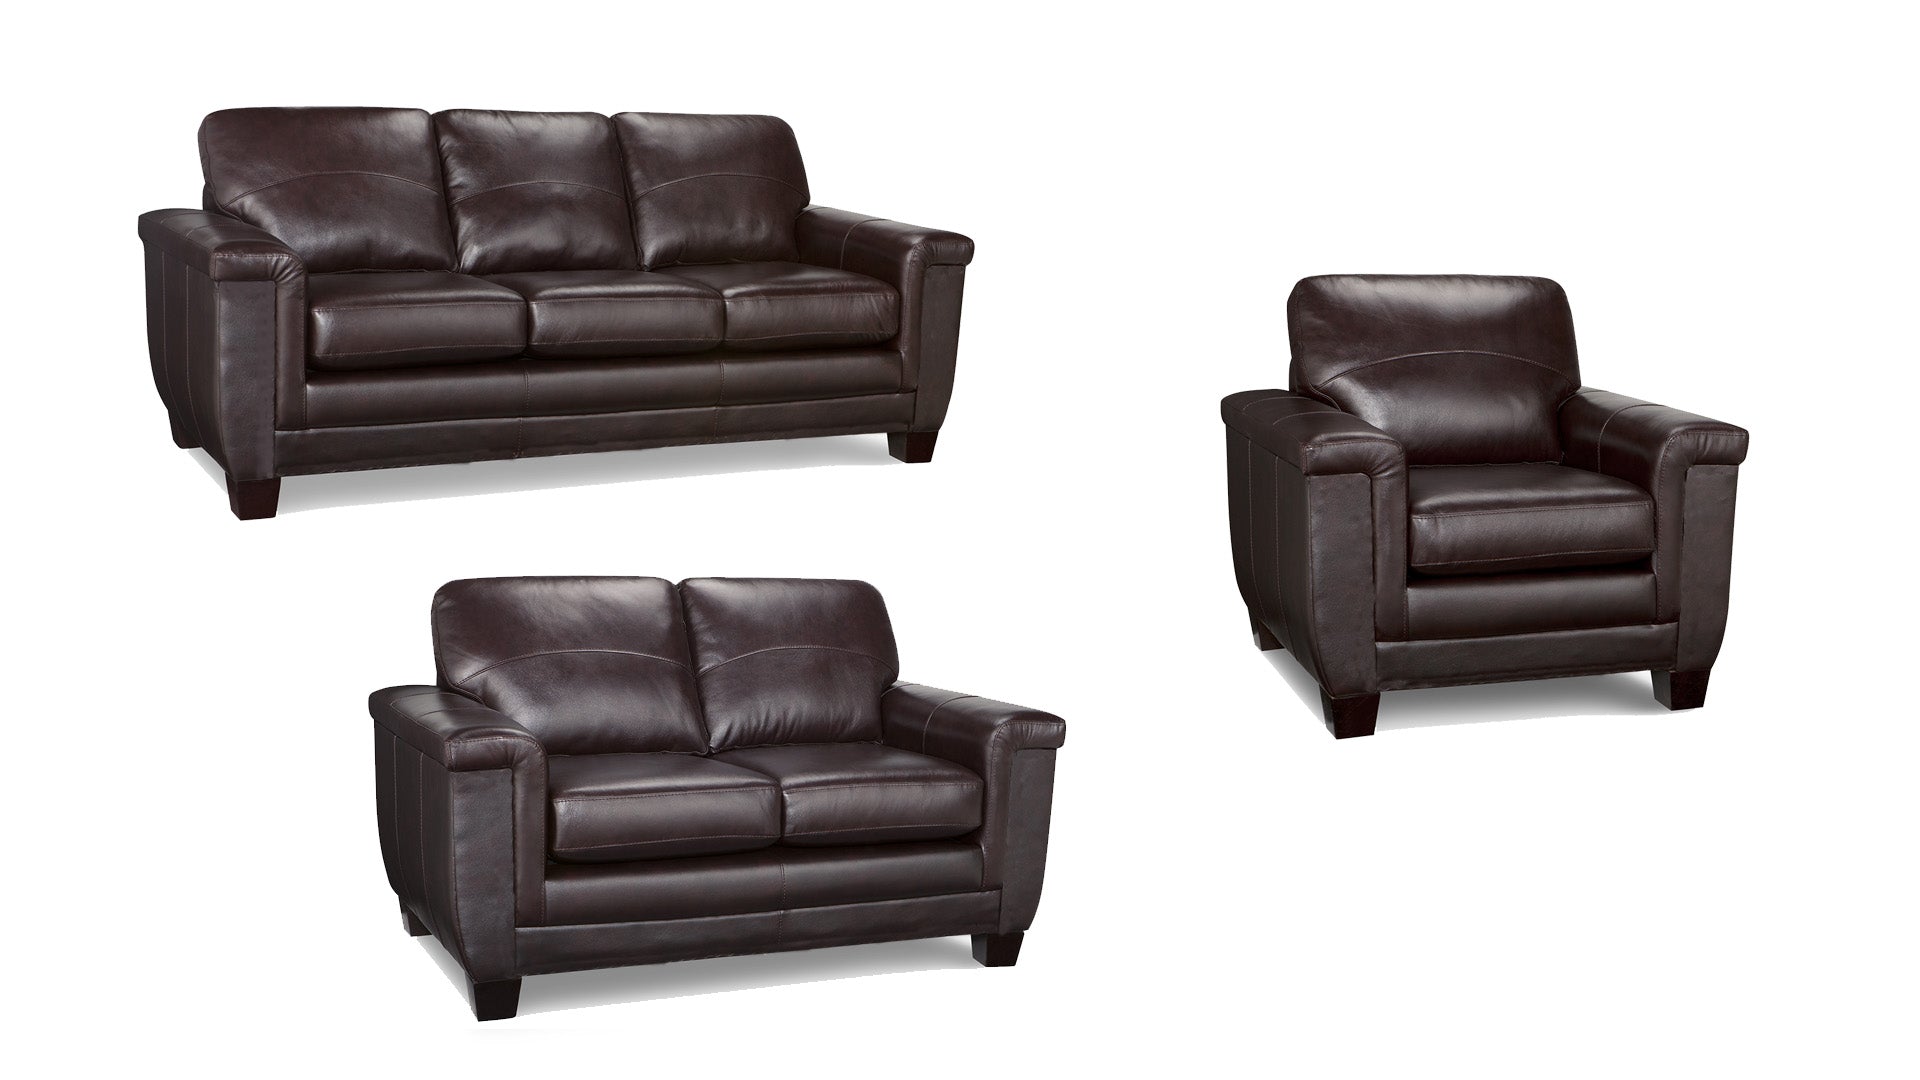 Canadian Made Zurick Cranberry Sofa Collection 4395